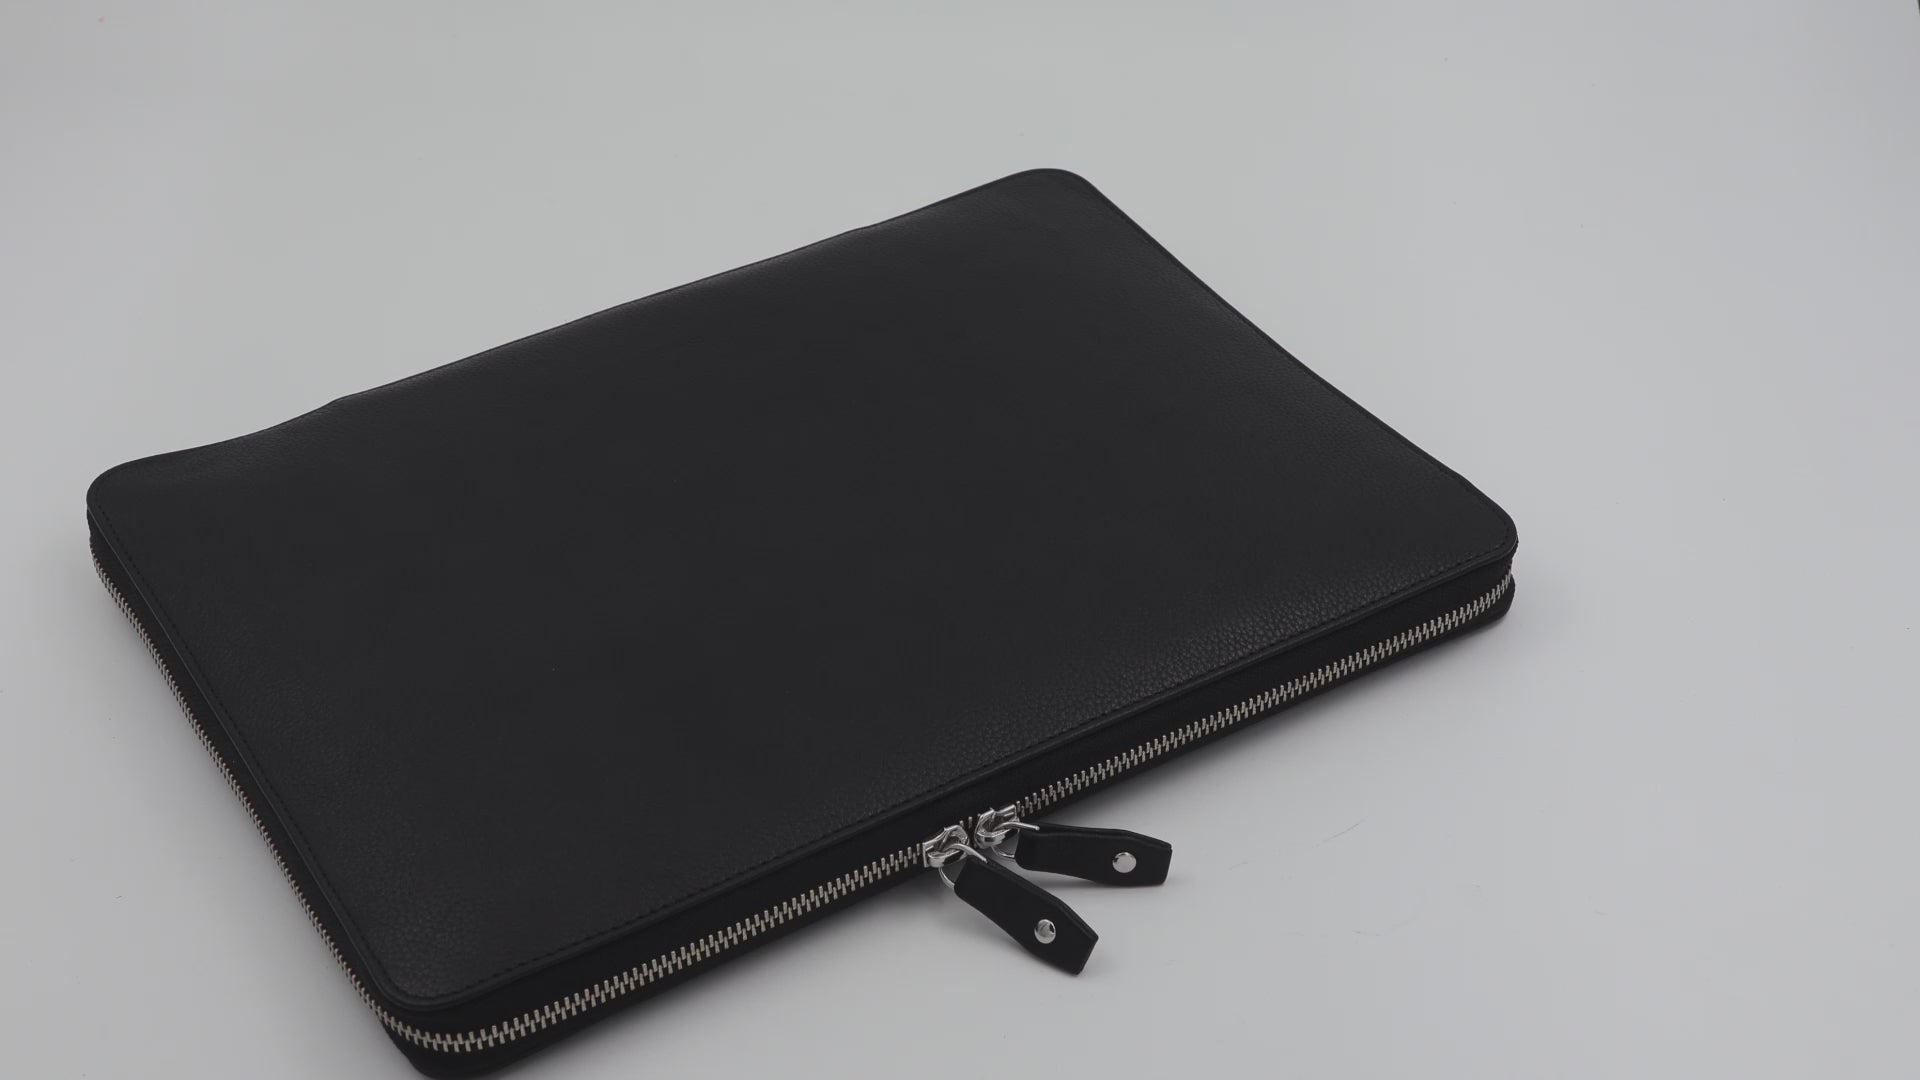 HP Envy Laptop zipper case handmade from black full grain leather in pebble texture. Monogramming available